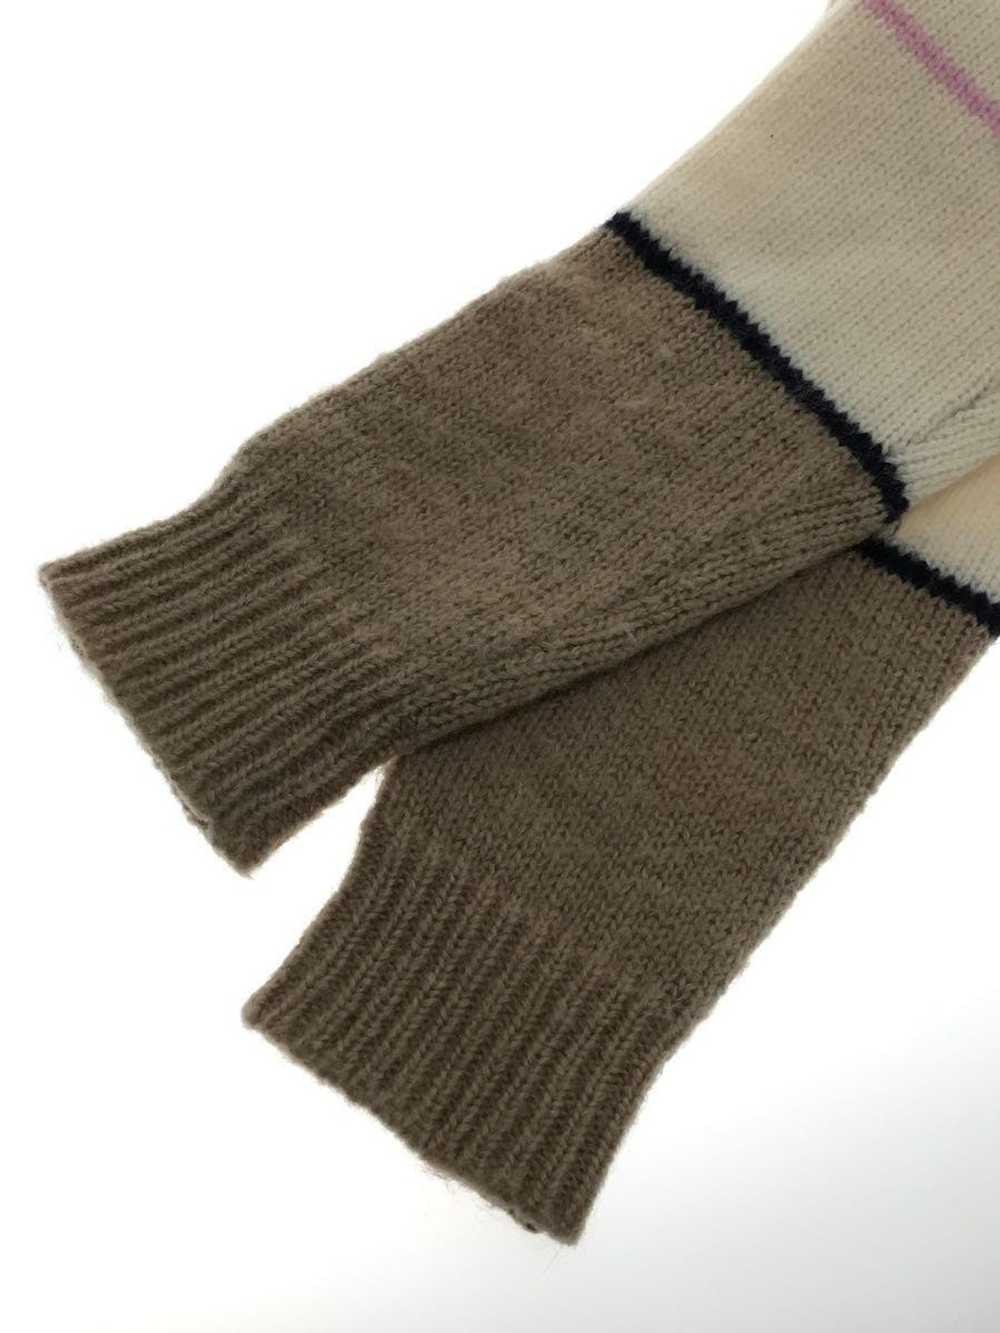 Acne Studios Mohair Wool Knit Sweater - image 6